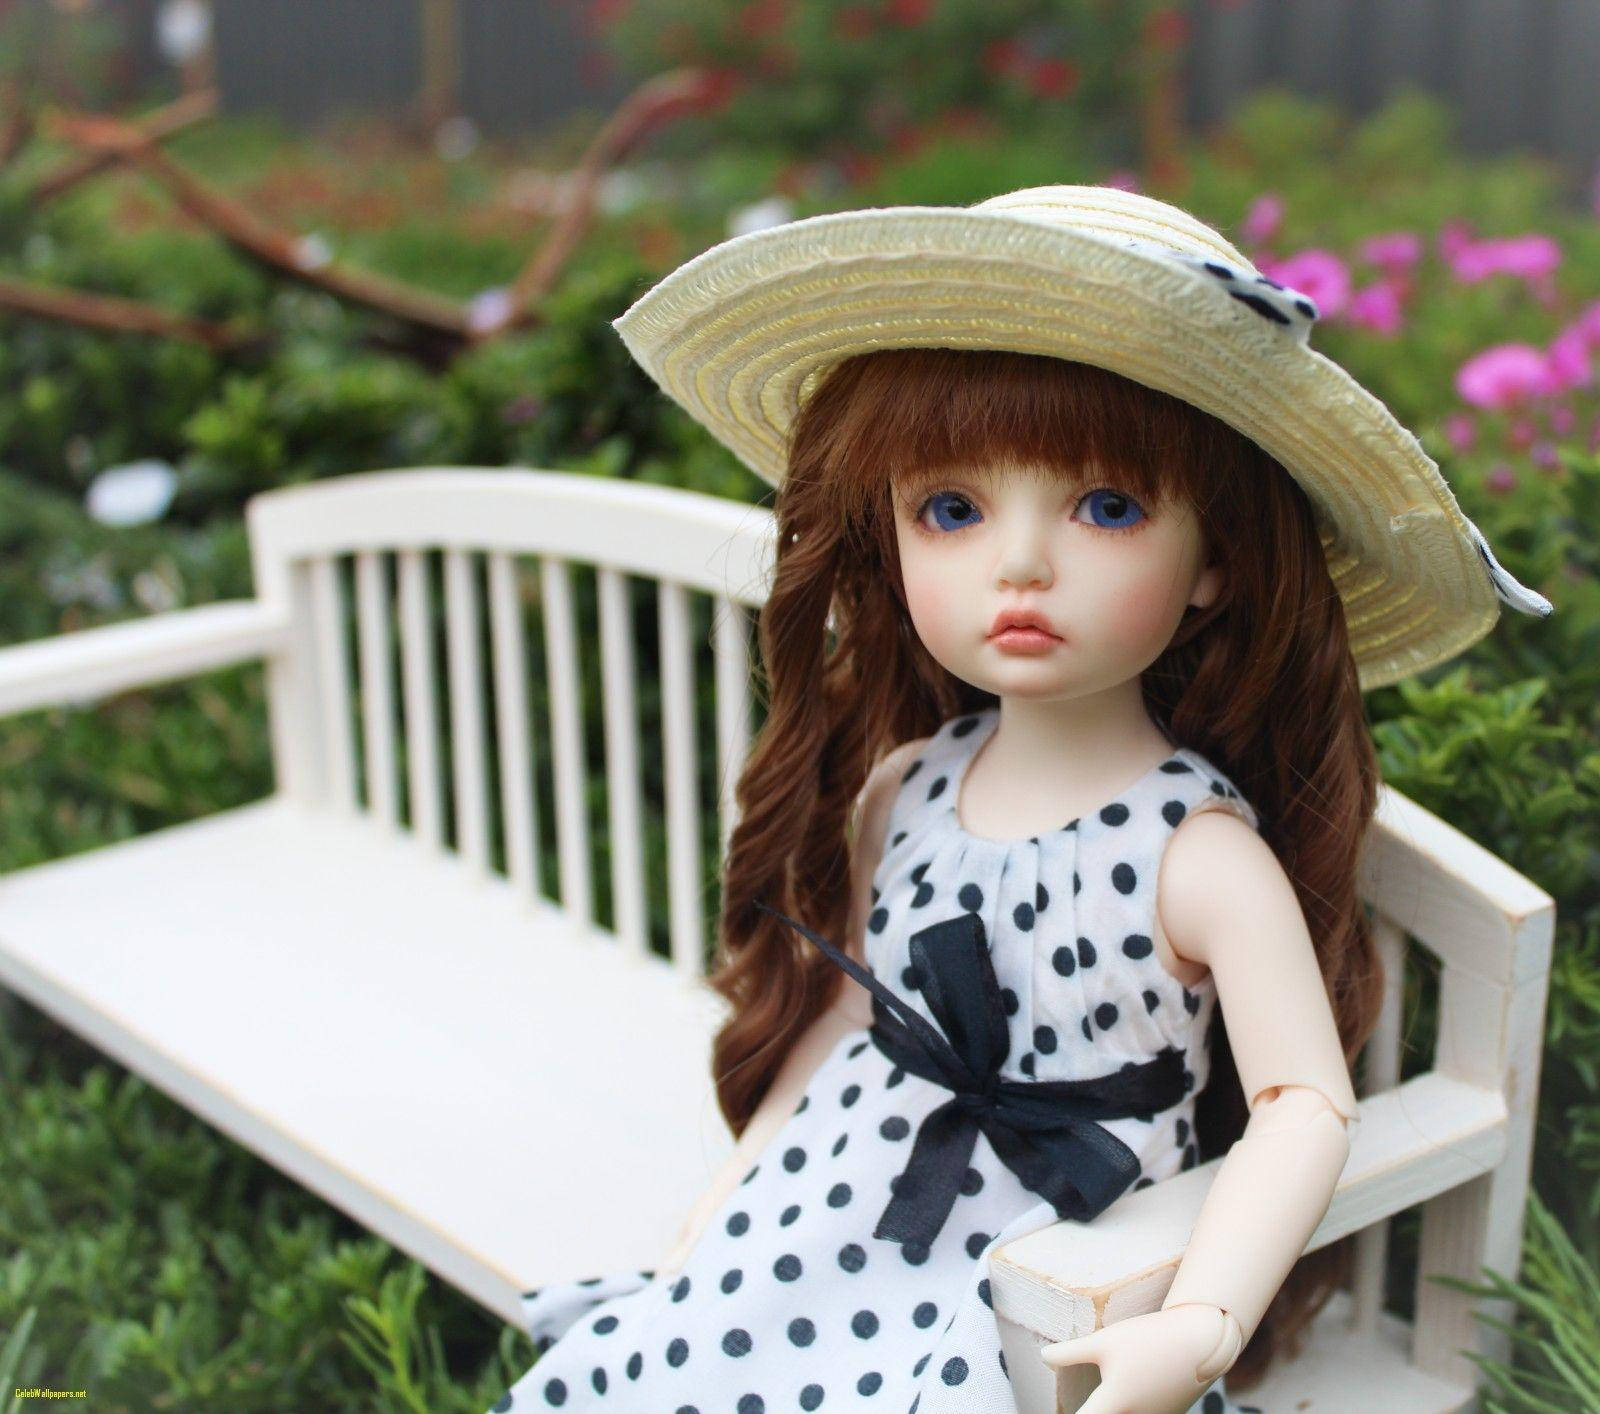 Cute Doll On Bench